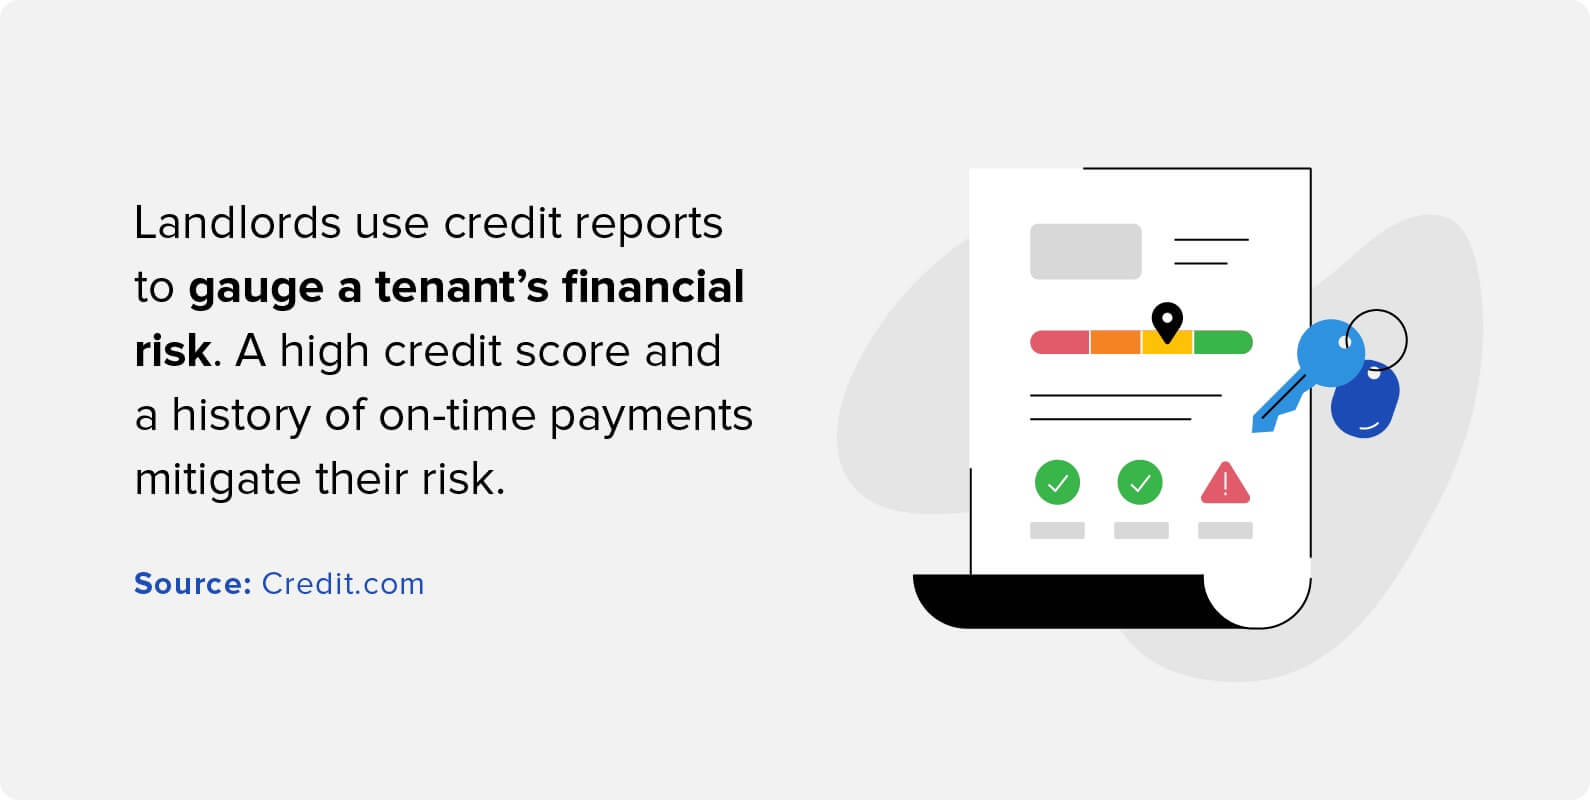 landlords use credit reports to gauge a tenant's financial risk. a high credit score and a history of on-time payments mitigate their risk